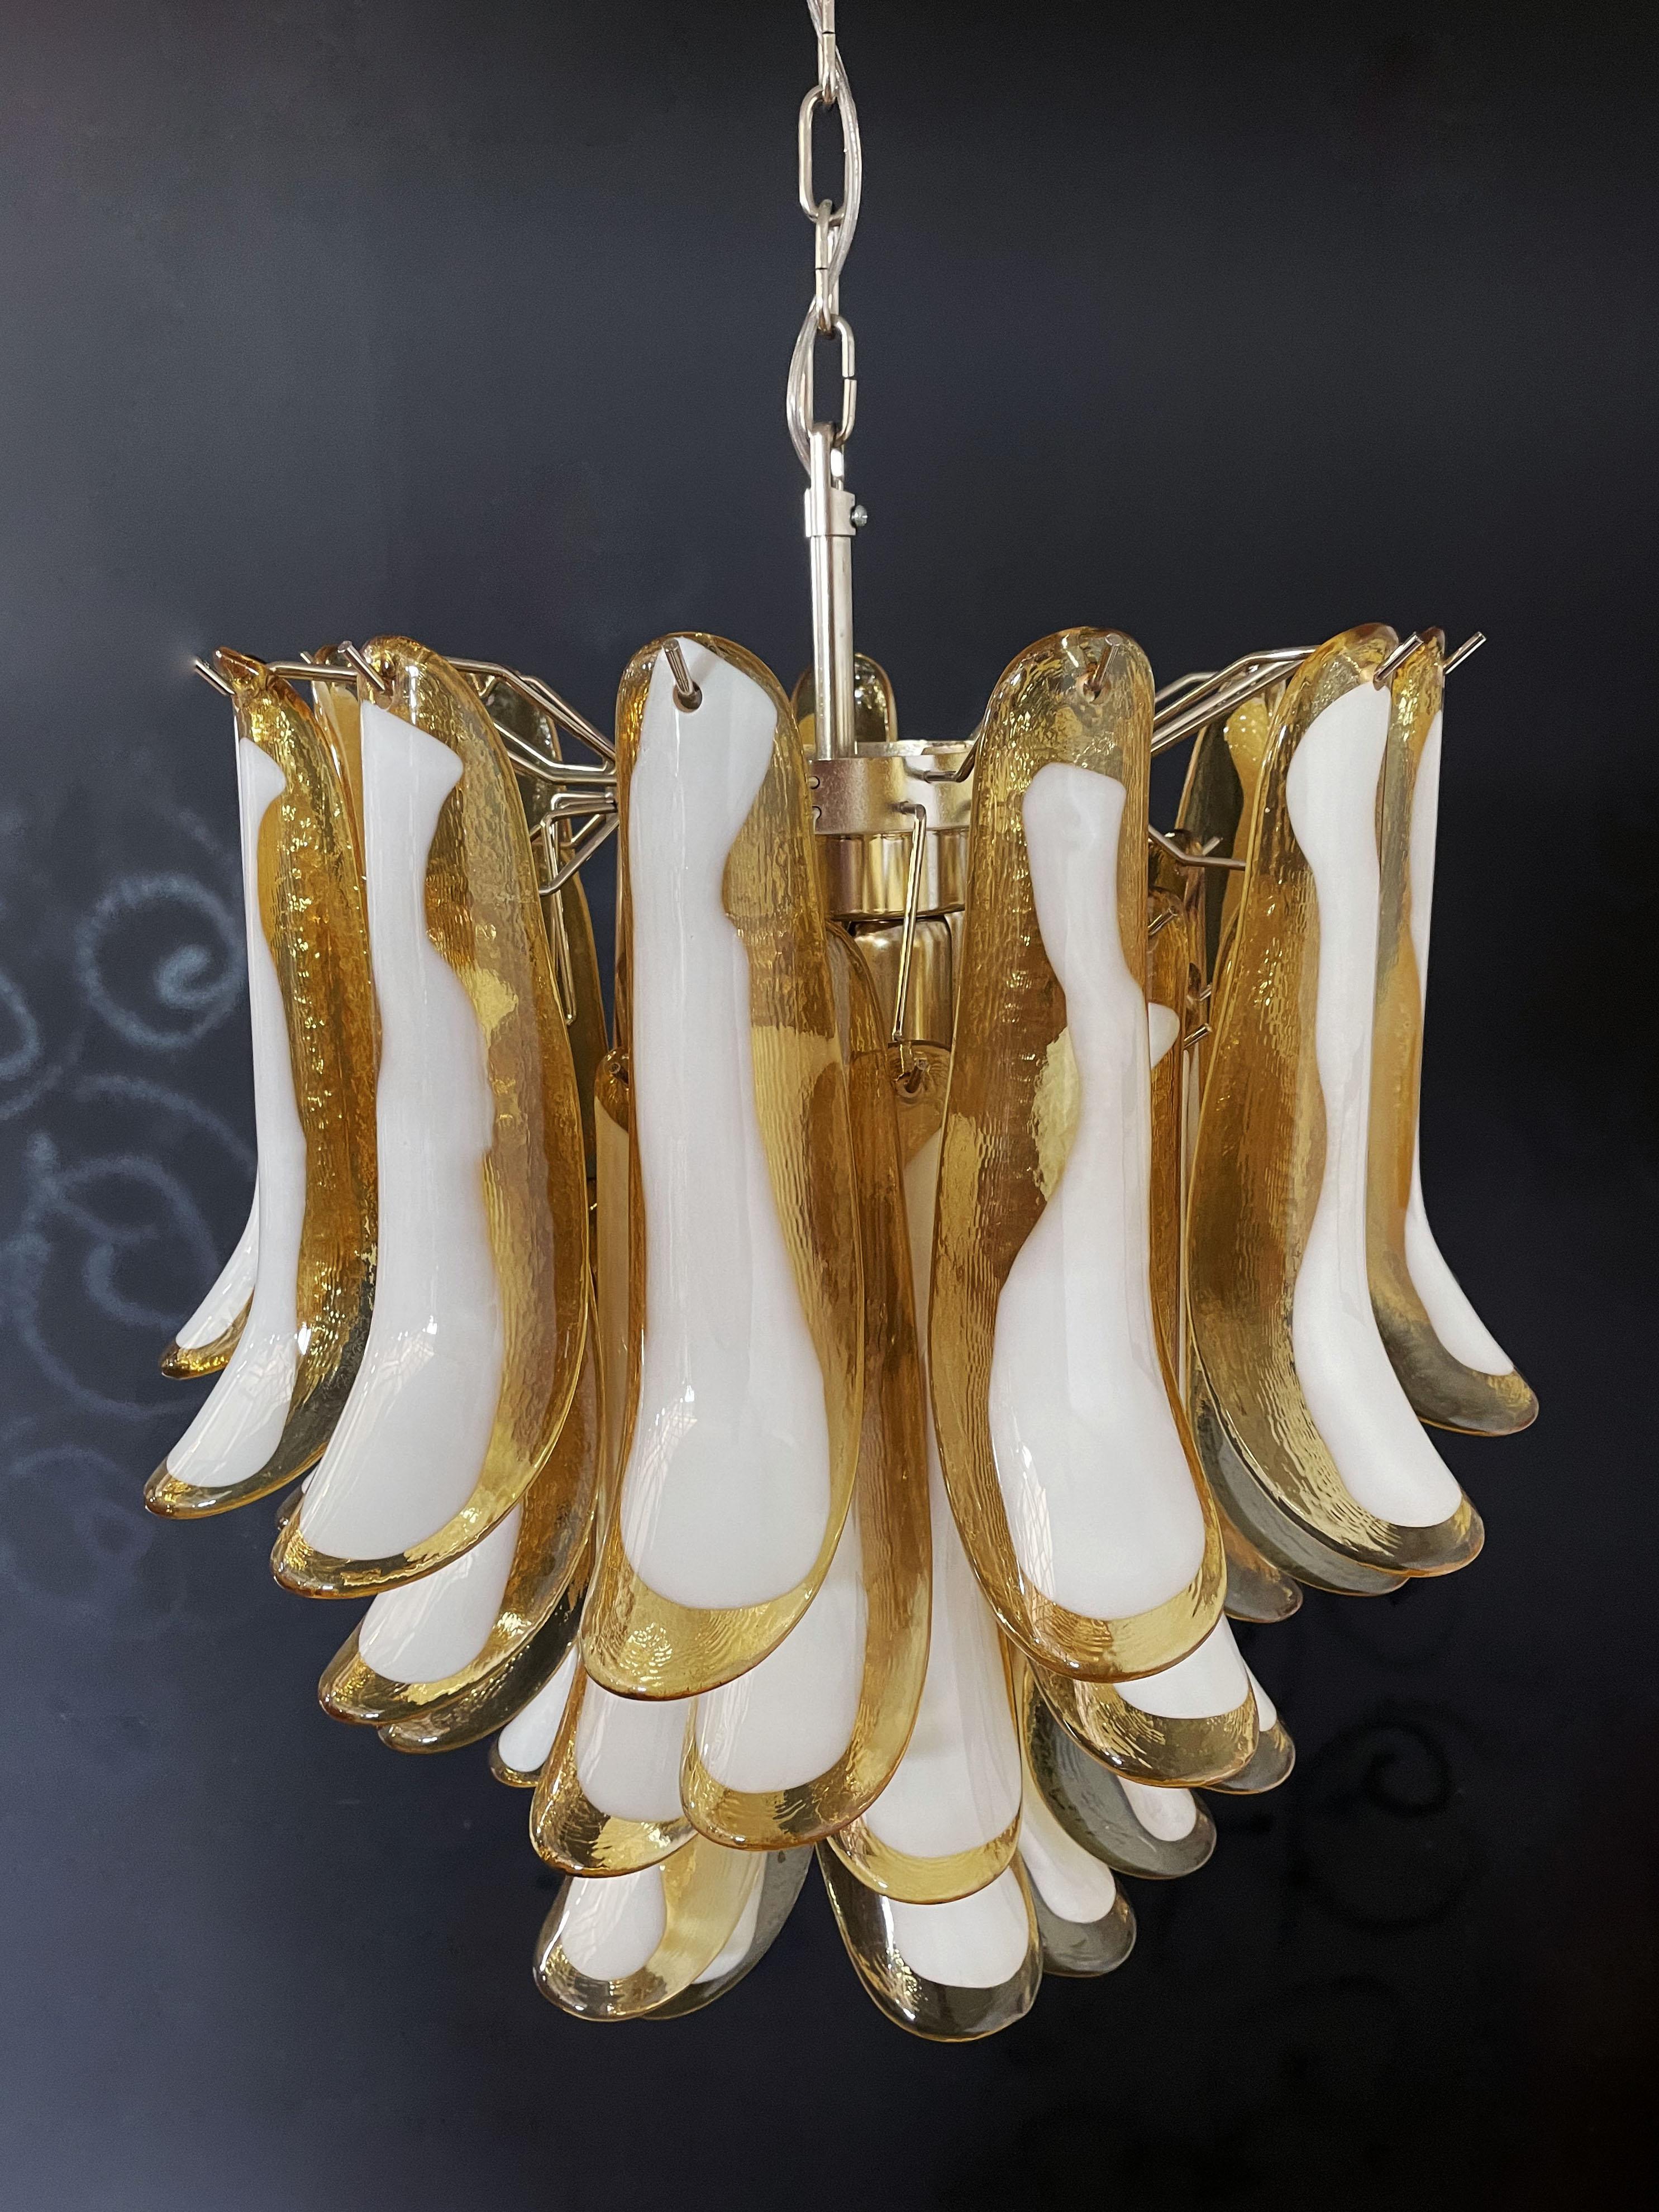 Murano Italian glass chandelier. Fantastic chandelier with caramel and white “lattimo” glasses, nickel-plated metal frame. It has 41 big monumental petals glass. The glasses are very high quality, the photos do not do the beauty, luster of these